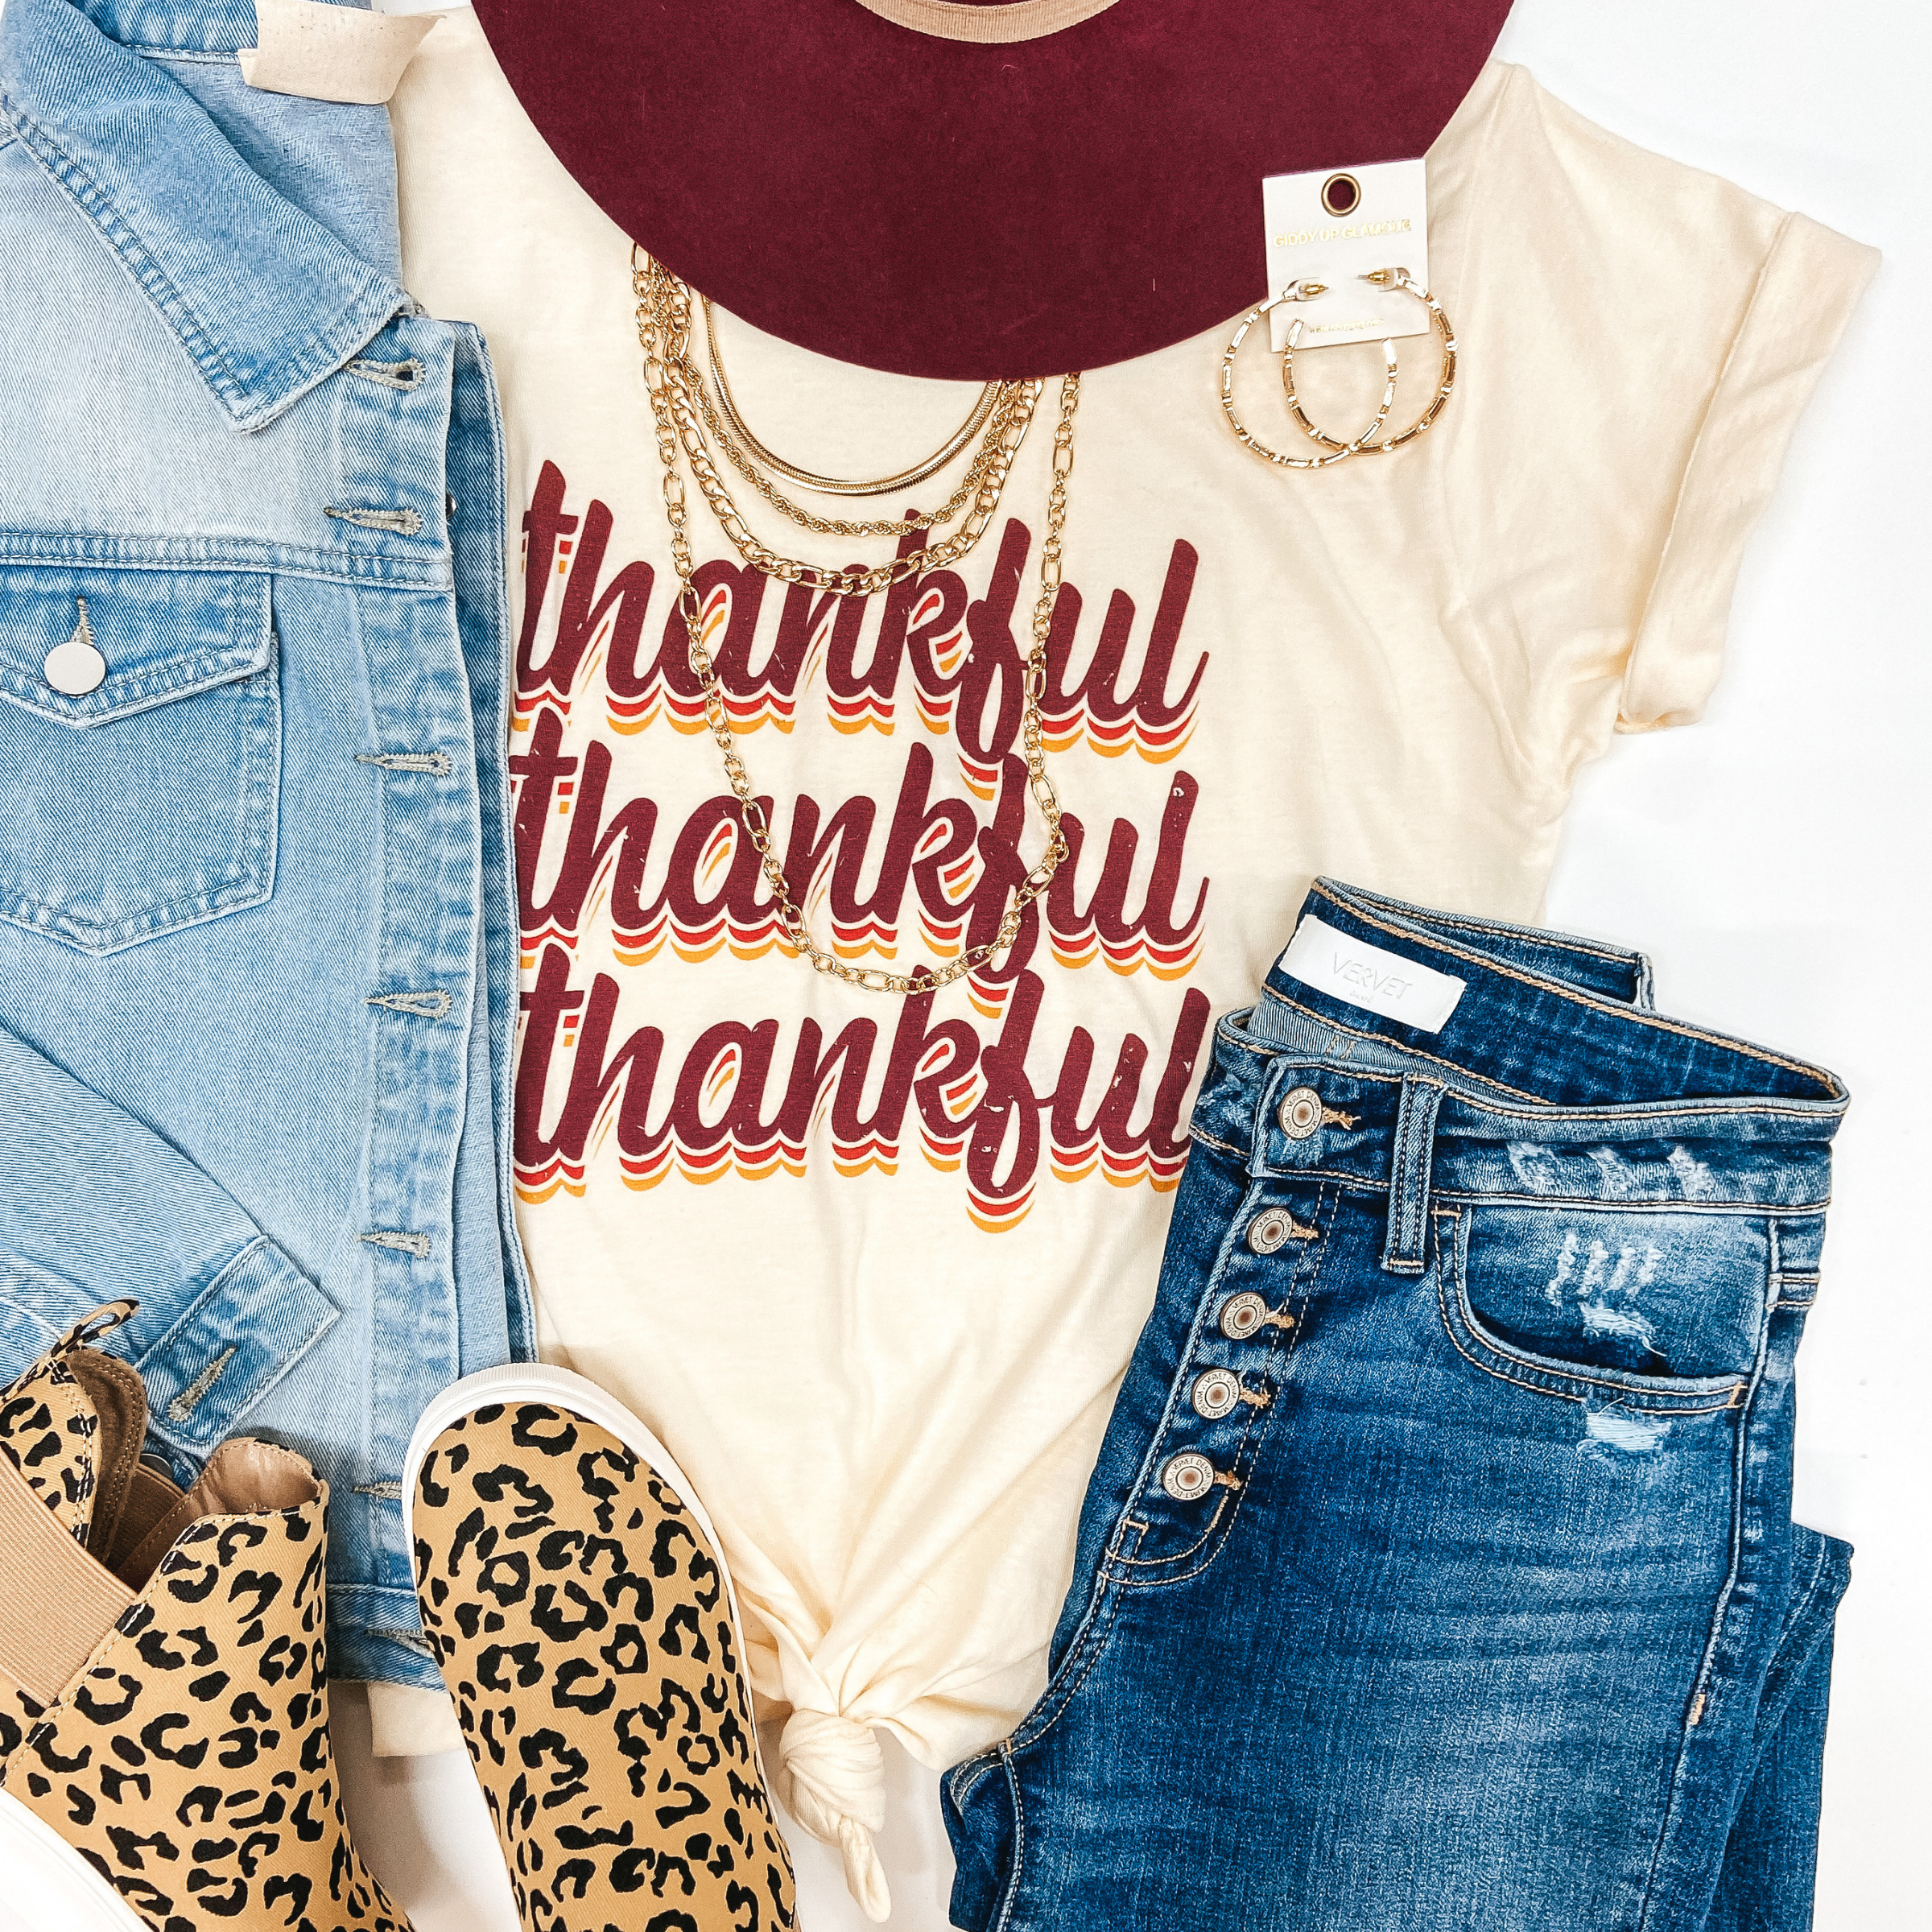 Ivory white tee with the words "thankful" written three times stacked in a burgundy color and orange then yellow shadow. Other clothes to make a full outfit are styled around the tee including a burgundy Charlie One Horse Hat, hoop earrings, necklaces, light wash denim jacket, medium wash jeans, and leopard print sneakers.